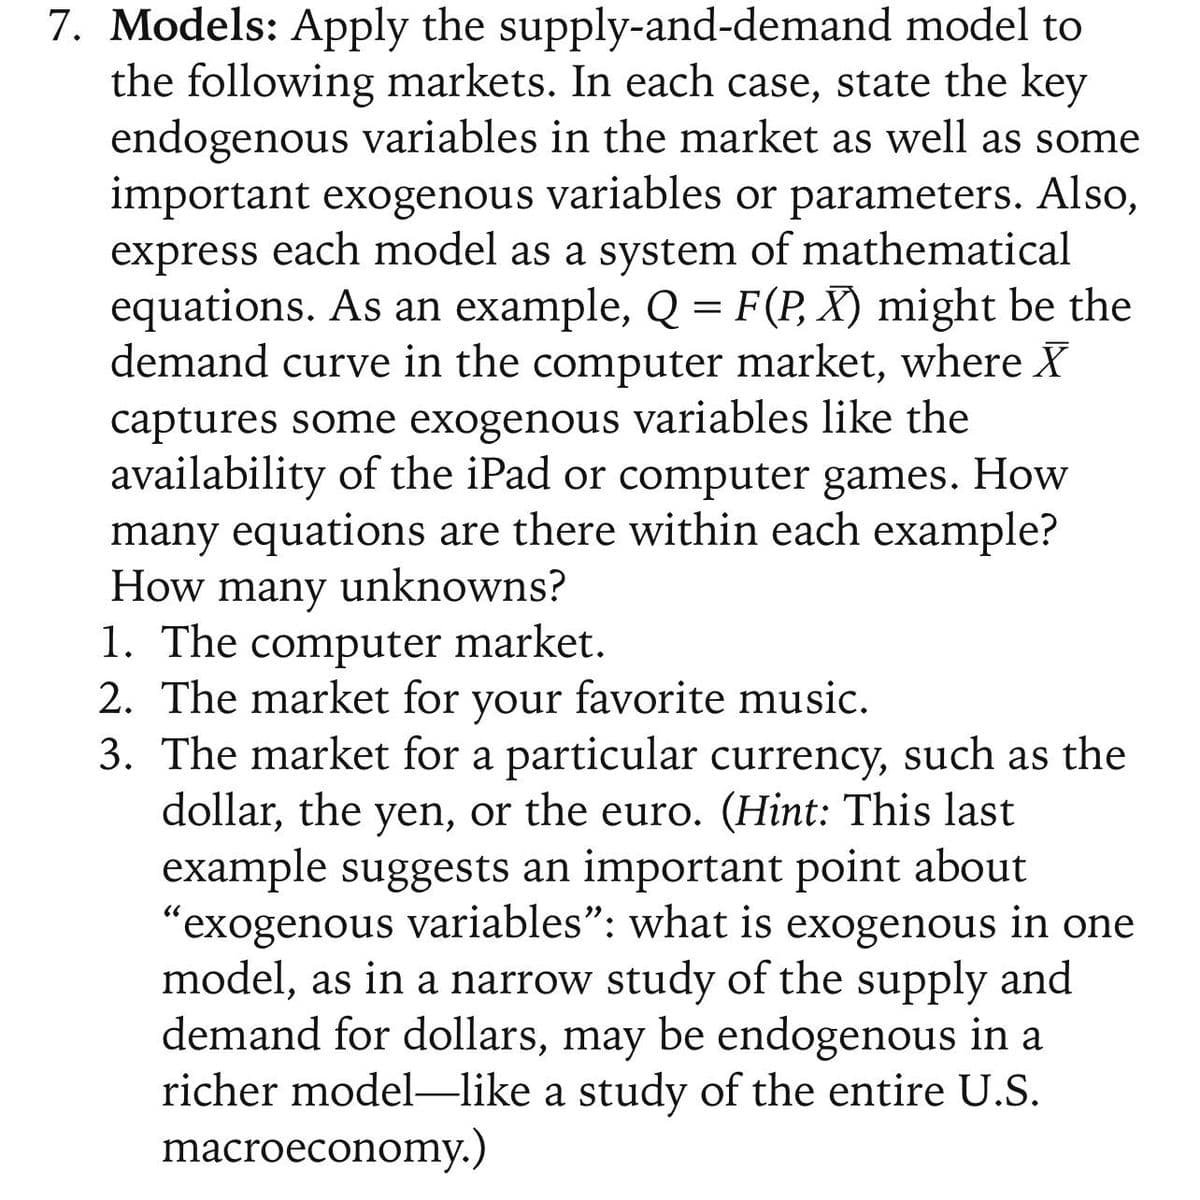 7. Models: Apply the supply-and-demand model to
the following markets. In each case, state the key
endogenous variables in the market as well as some
important exogenous variables or parameters. Also,
express each model as a system of mathematical
equations. As an example, Q = F(P, X) might be the
demand curve in the computer market, where X
captures some exogenous variables like the
availability of the iPad or computer games. How
many equations are there within each example?
How many unknowns?
1. The computer market.
2. The market for your favorite music.
3. The market for a particular currency, such as the
dollar, the yen, or the euro. (Hint: This last
example suggests an important point about
"exogenous variables": what is exogenous in one
model, as in a narrow study of the supply and
demand for dollars, may be endogenous in a
richer model-like a study of the entire U.S.
macroeconomy.)